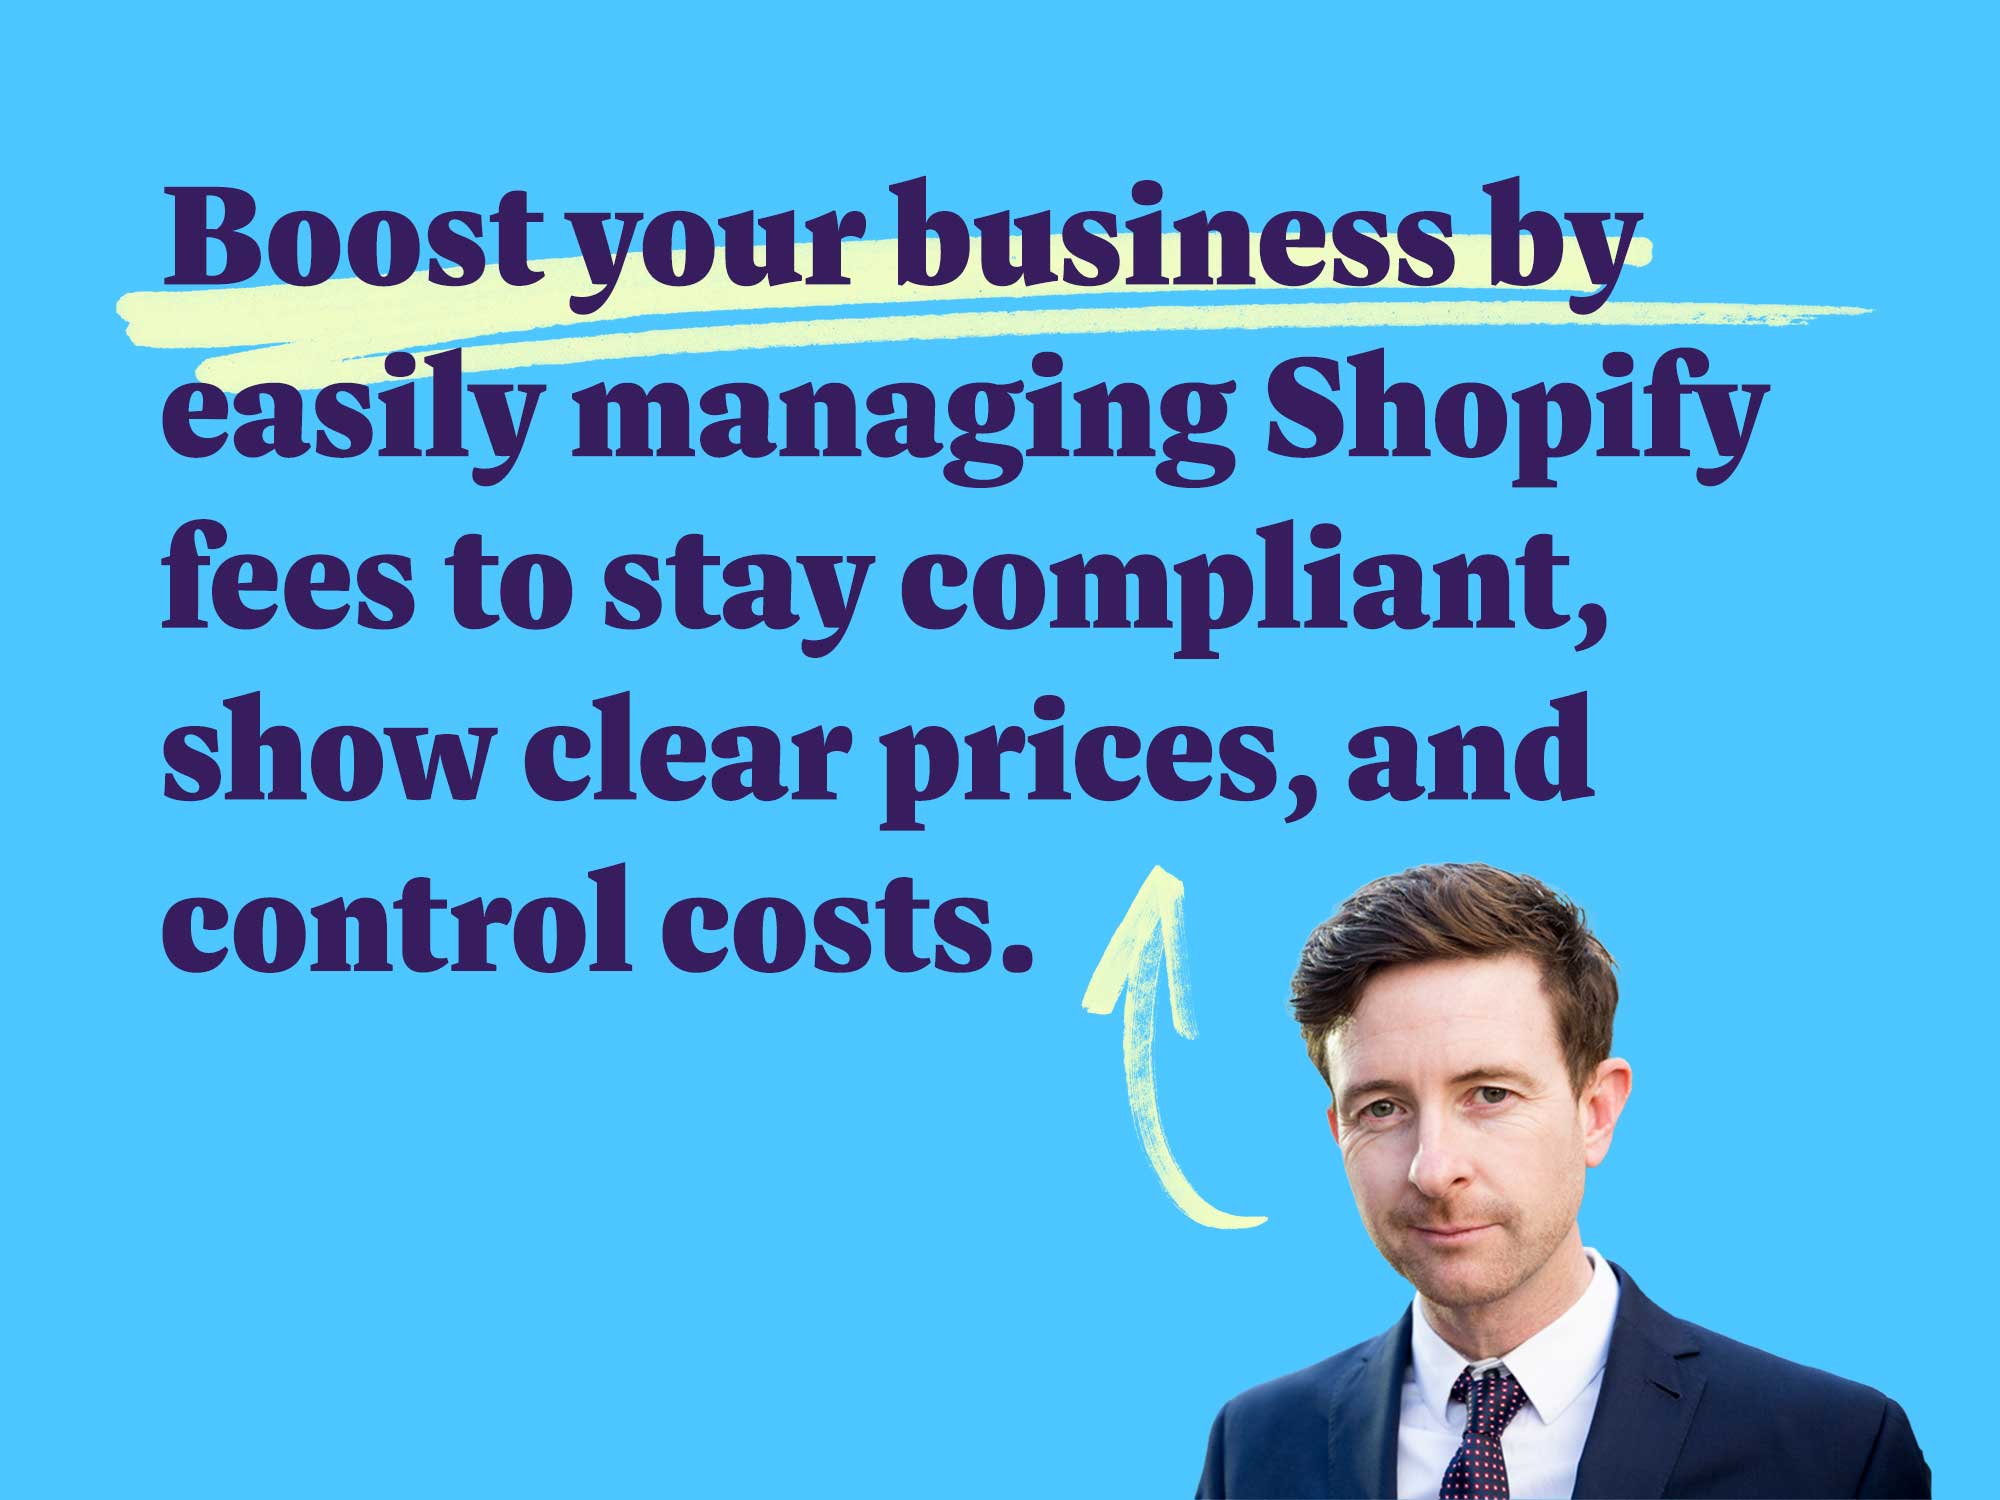 Boost your business by easily managing Shopify fees to stay compliant, show clear prices, and control costs.